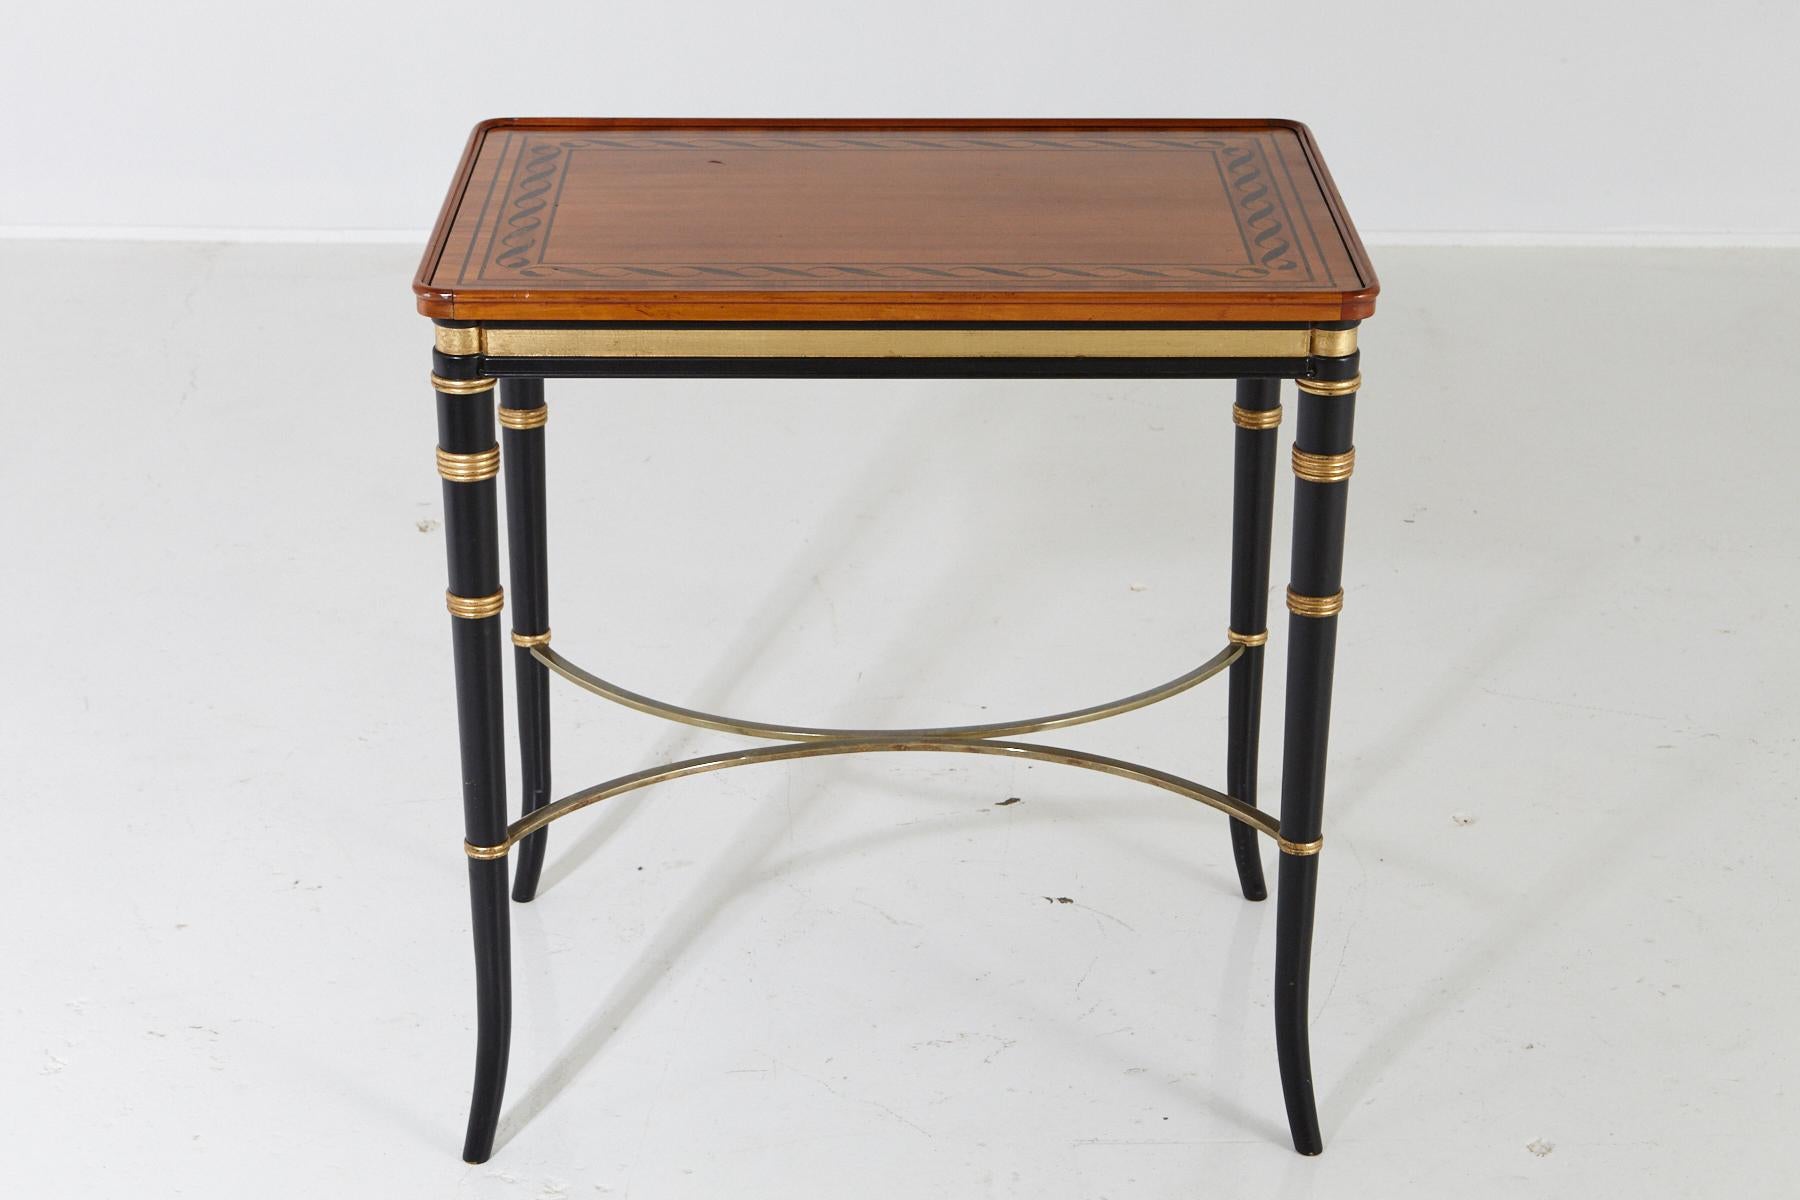 Beautiful eye-catching Regency style end table with paint decorated mahogany top and ebonized apron and legs with gilt rings, splayed feet, and brass reverse 